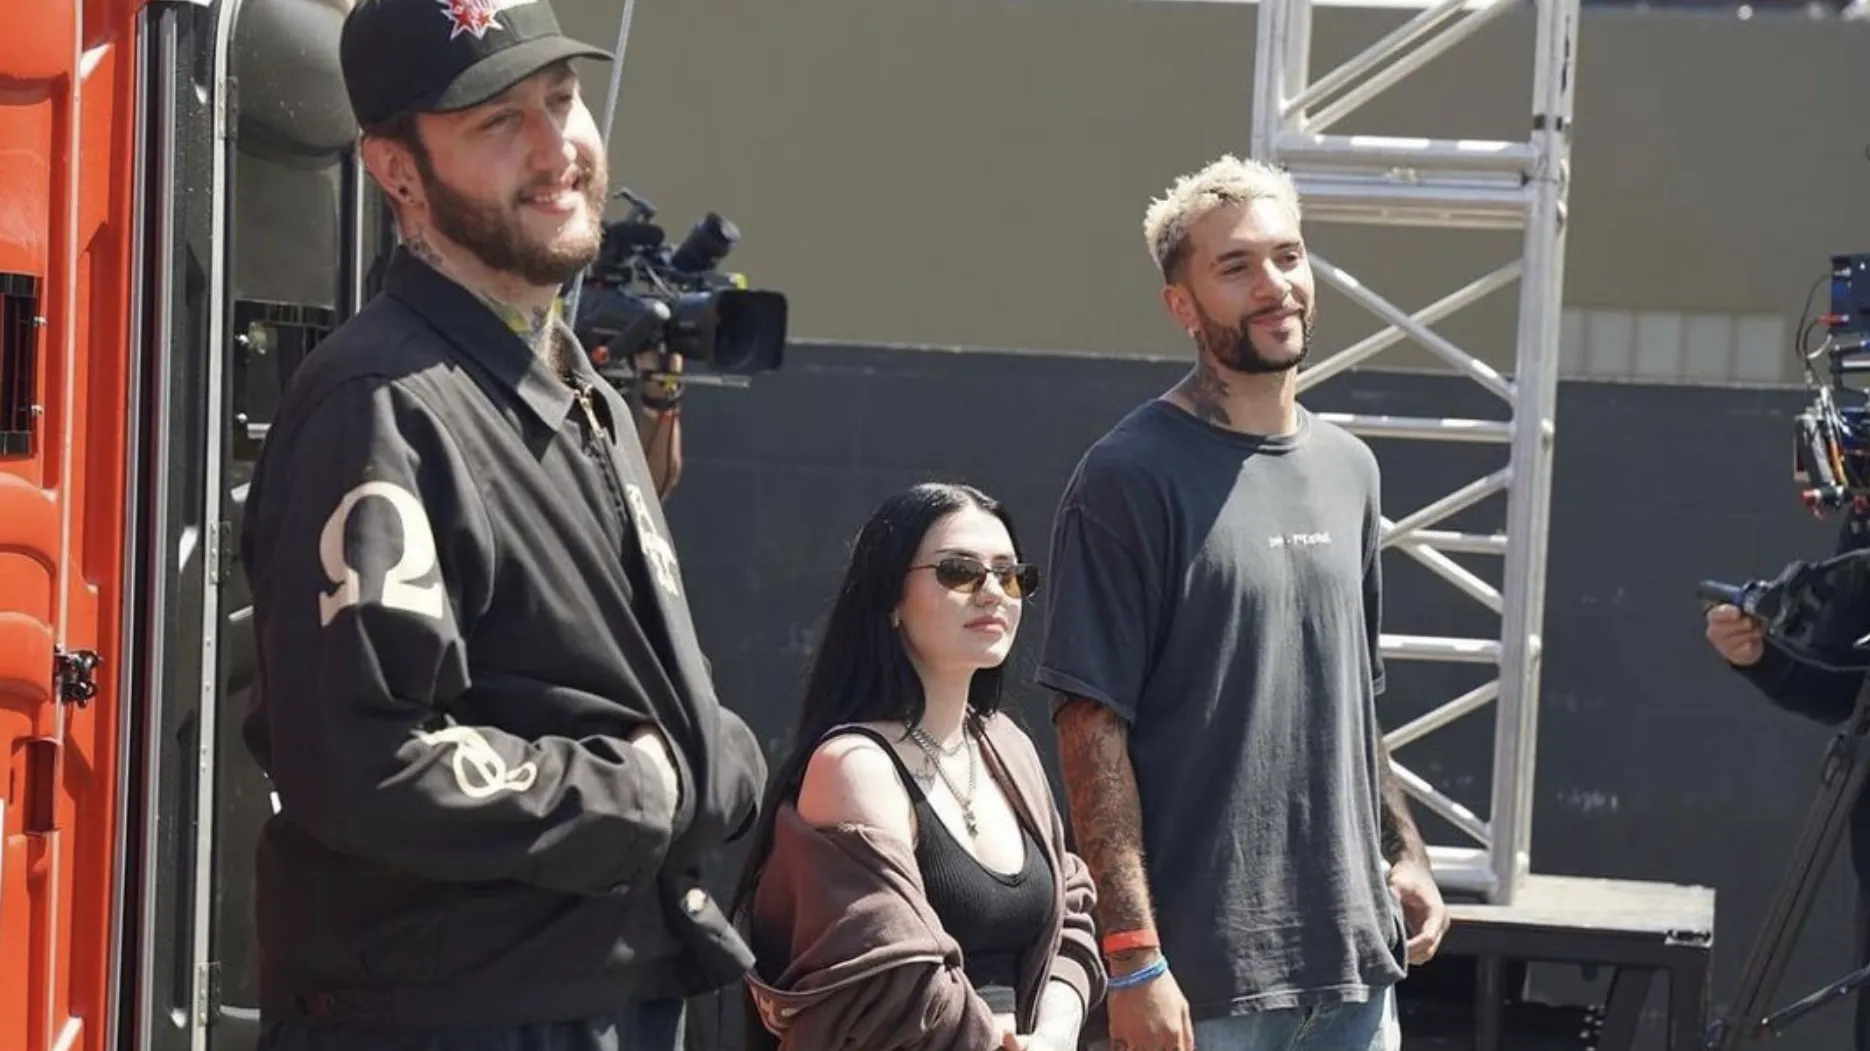 Photograph of Banks, Kalei, and Temperr. They're backstage on a film set, wearing all-black.